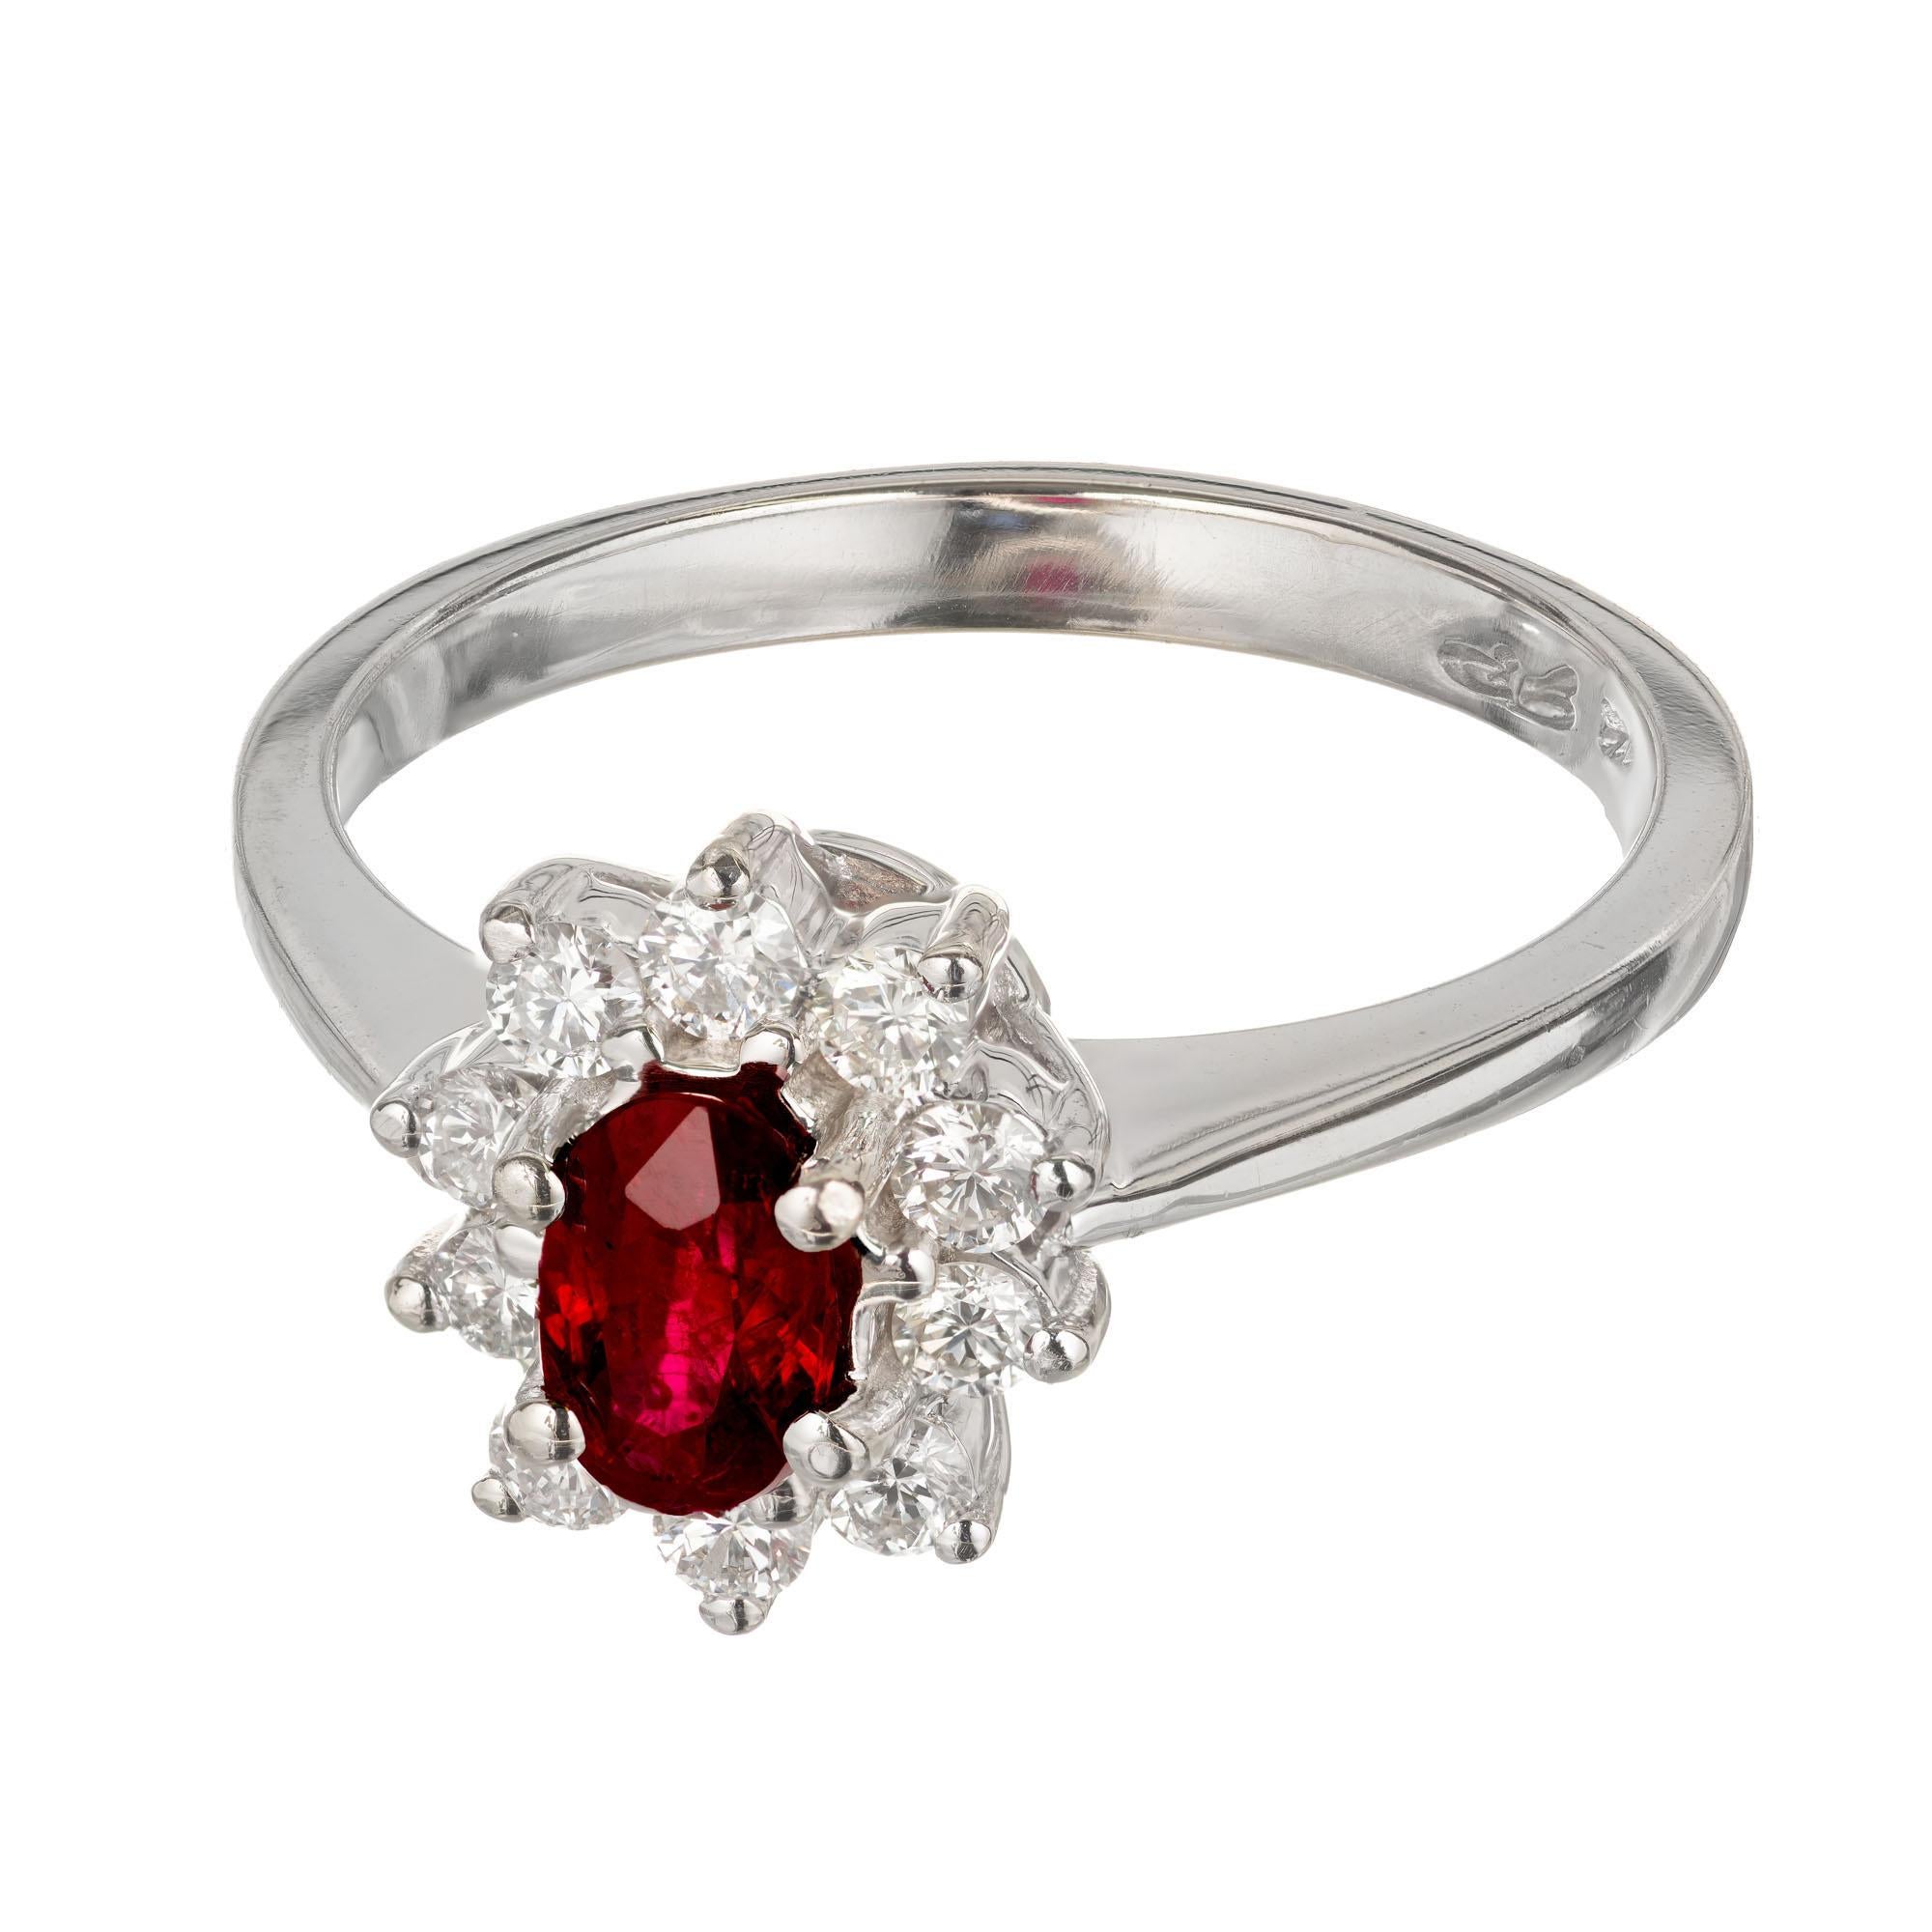 Ruby and diamond engagement ring. Oval center ruby with a halo of round accent diamonds in a 14k white gold setting.  

1 oval Ruby 5.8 x 3.9 x 2.6mm, approx. total weight .55cts  GIA certificate #1152308217. natural ruby, simple heat treatment and